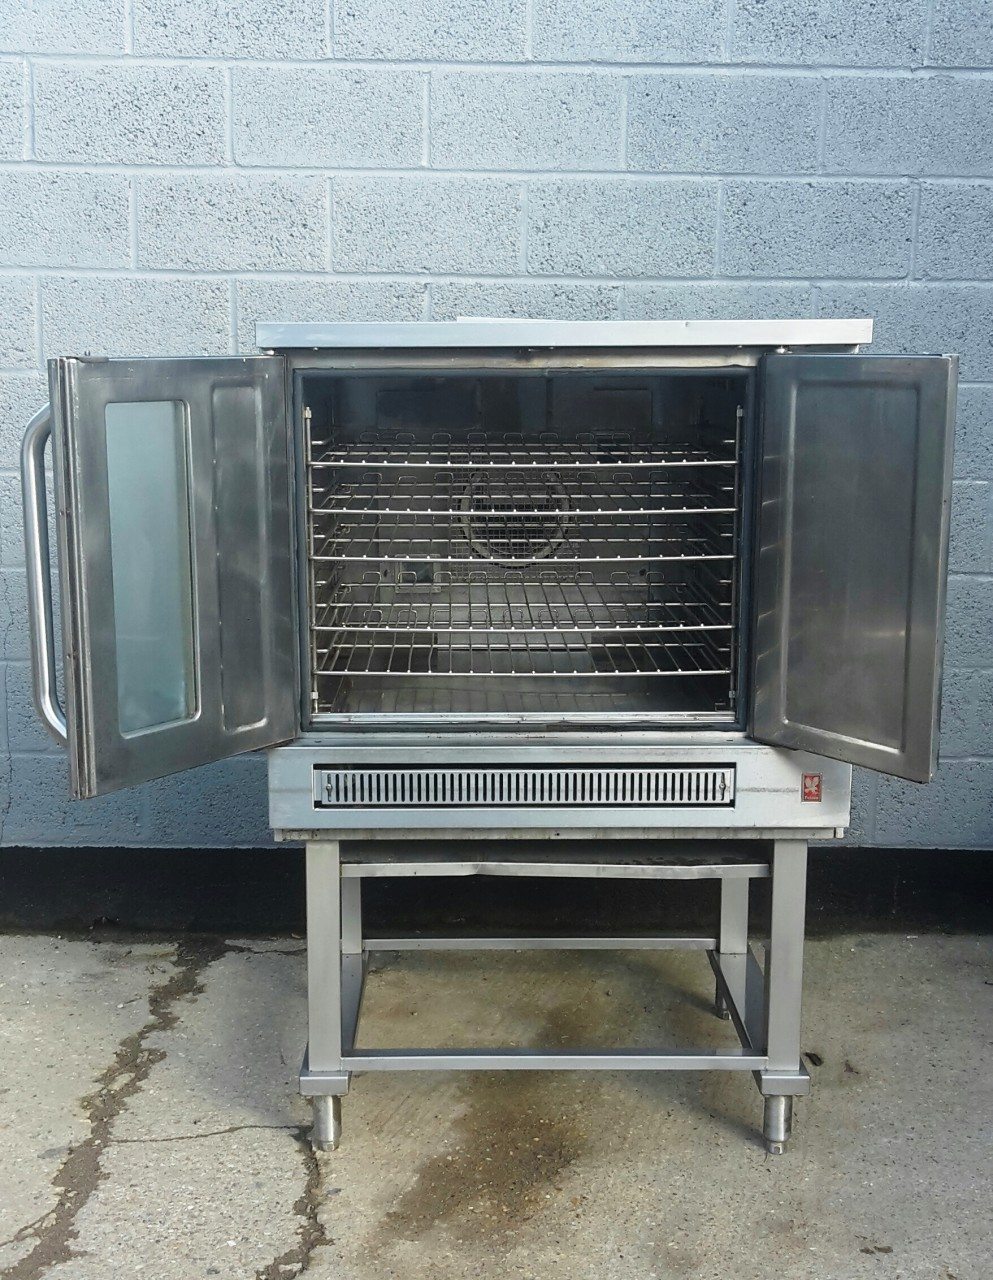 FALCON 80 Gas Convection Oven with Floor Stand